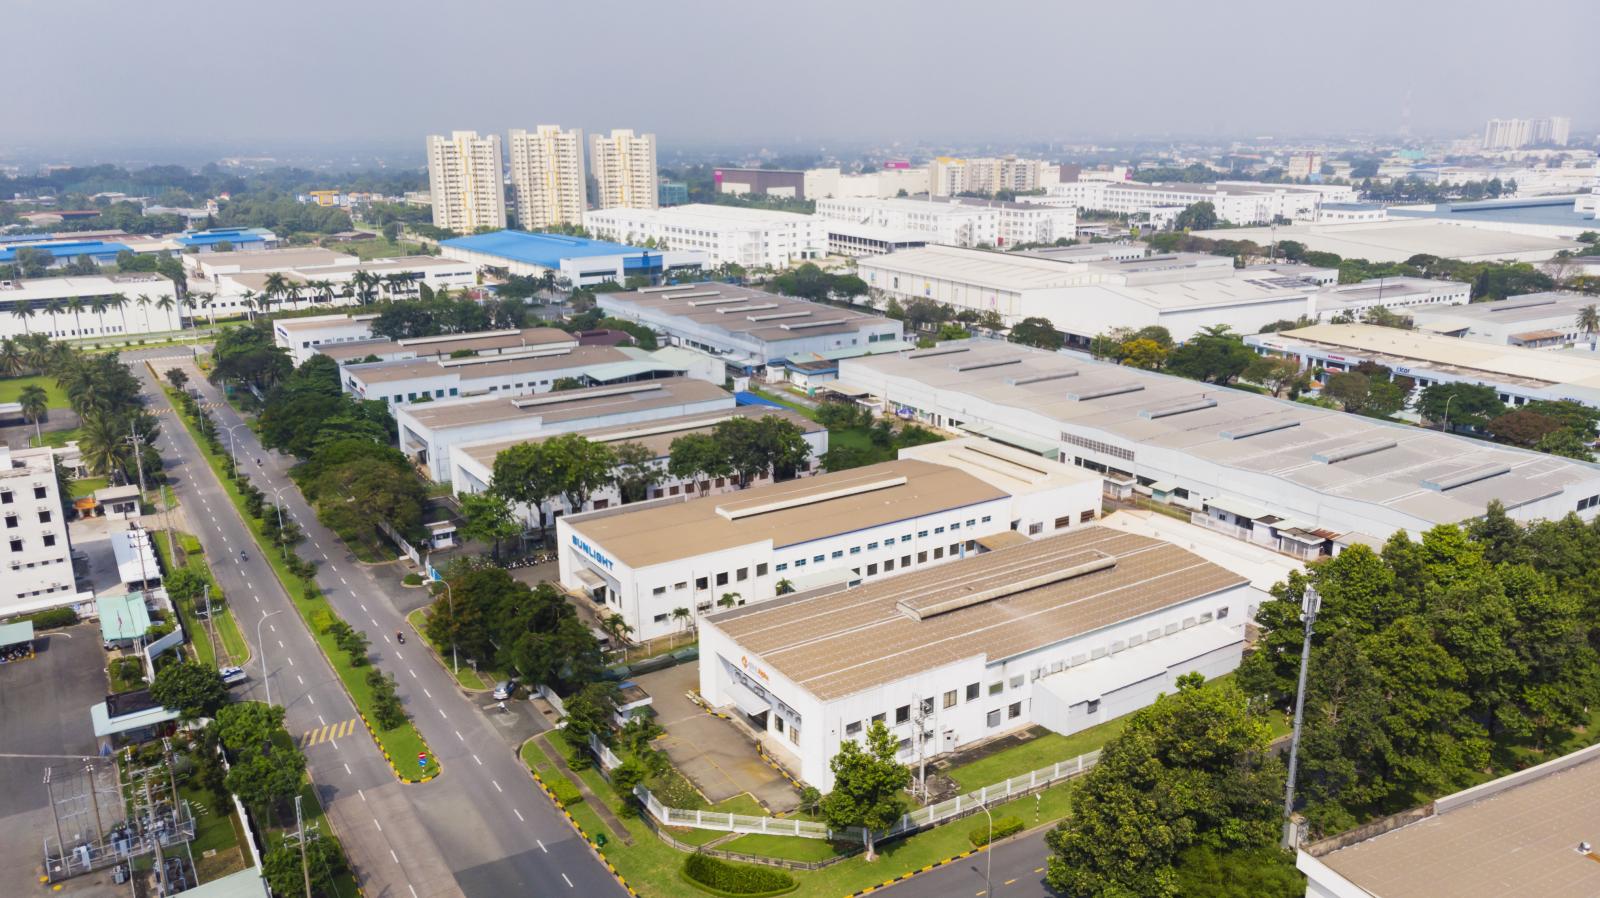 Tan Uyen real estate “shines” according to the wave of industrial parks